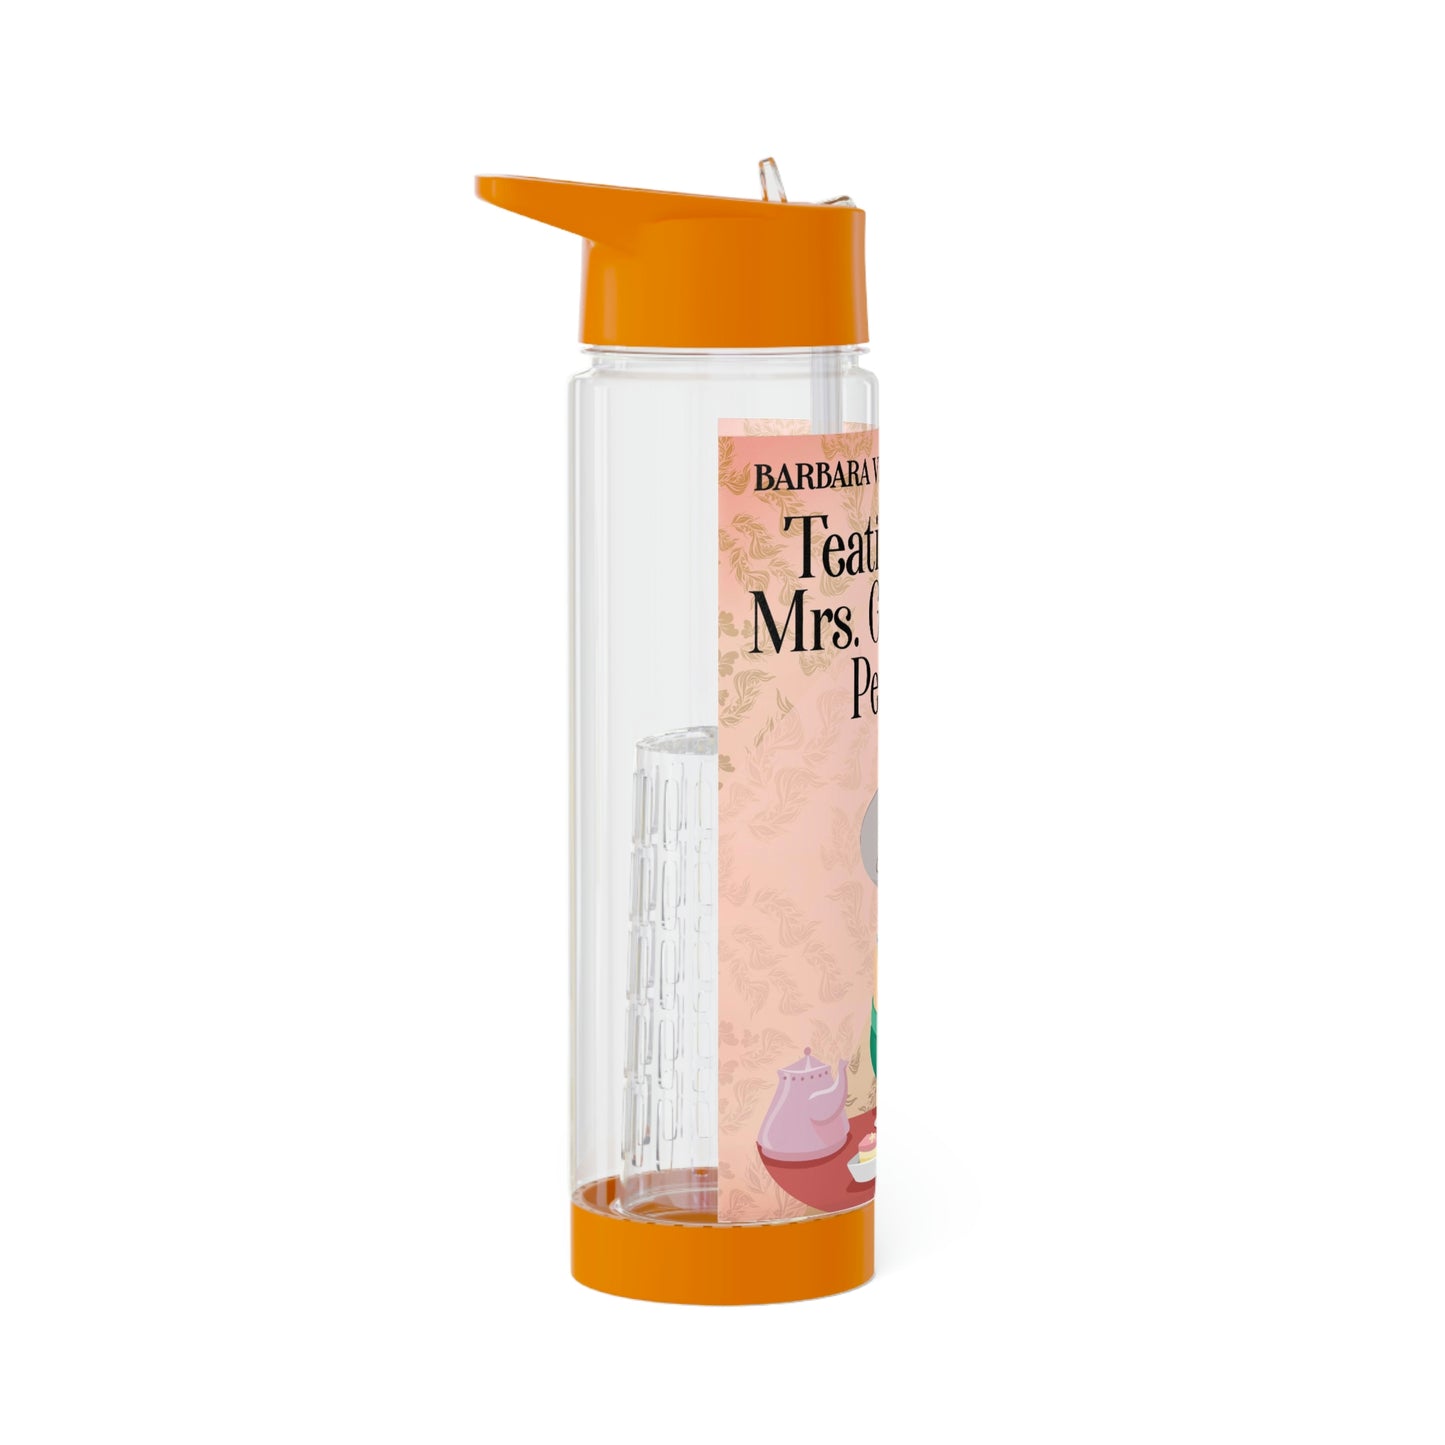 Teatime With Mrs. Grammar Person - Infuser Water Bottle